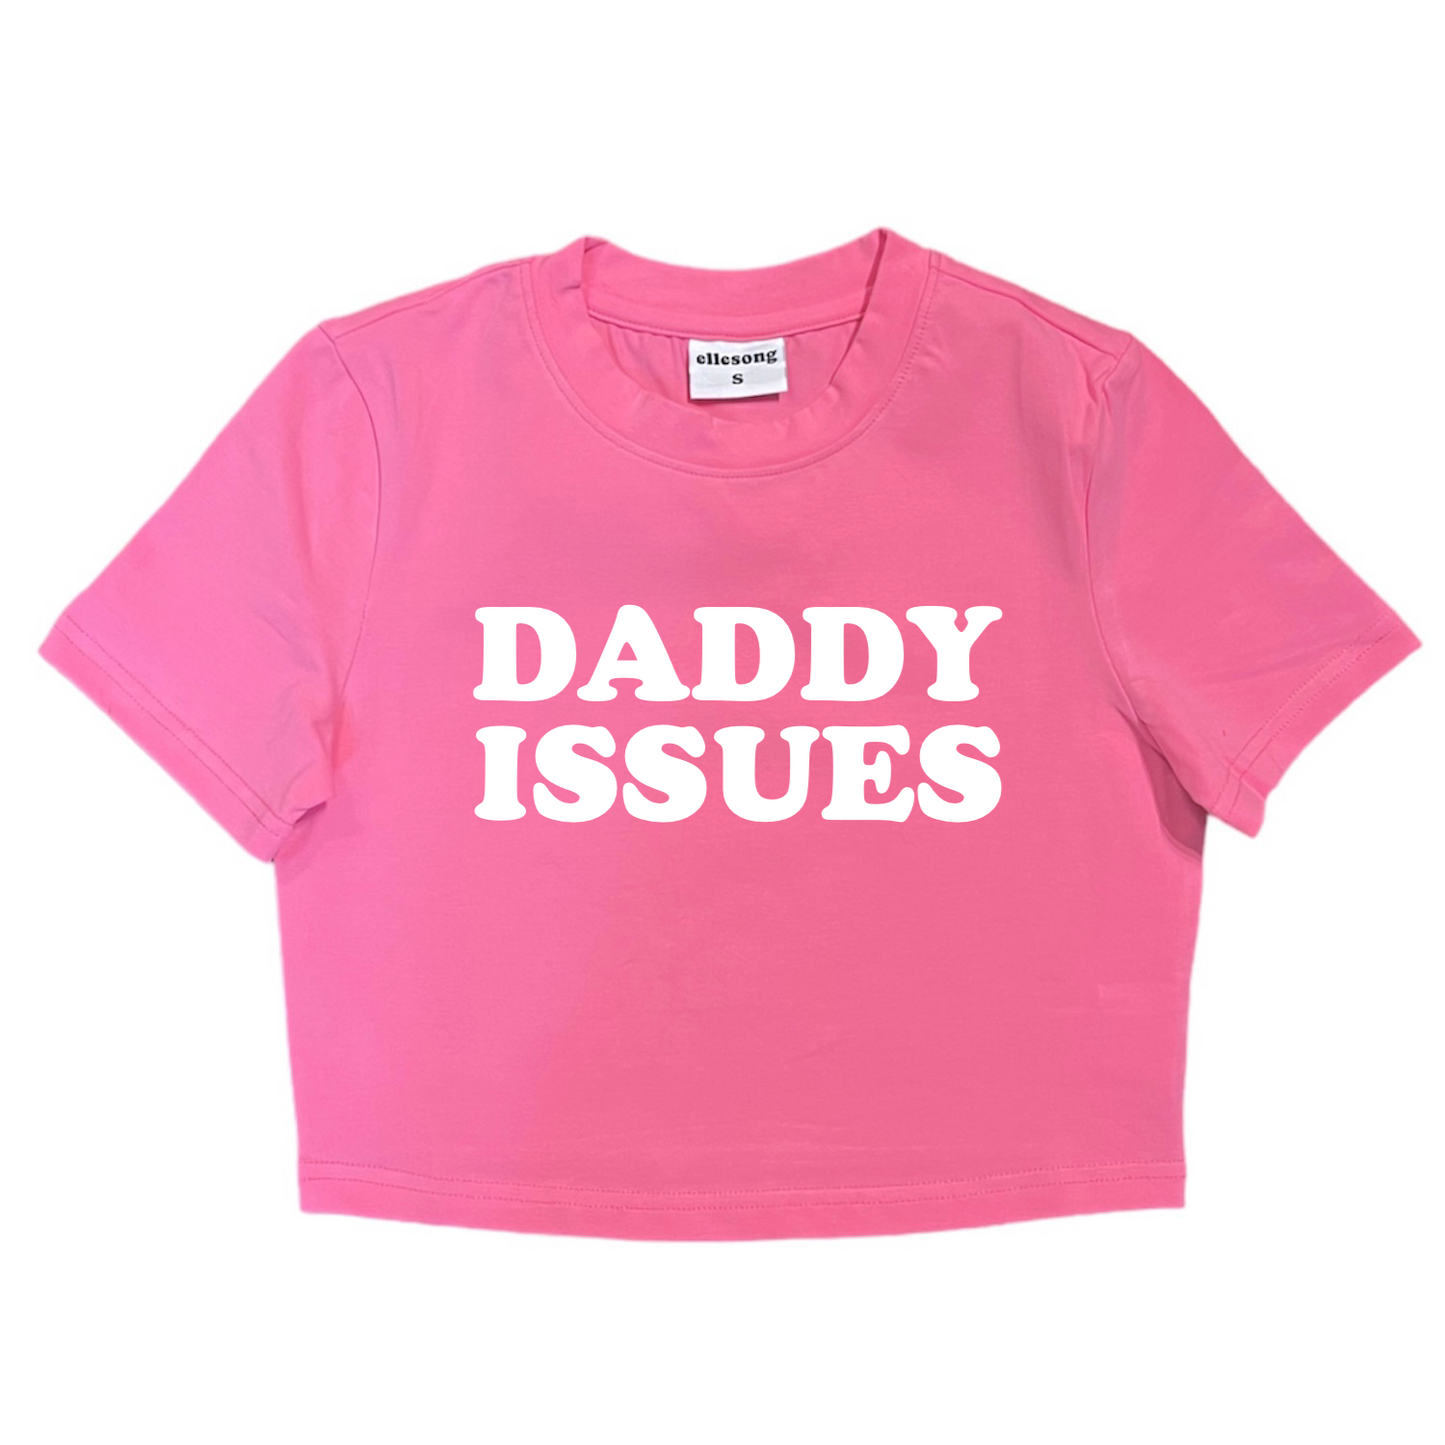 Daddy Issues Baby Tee